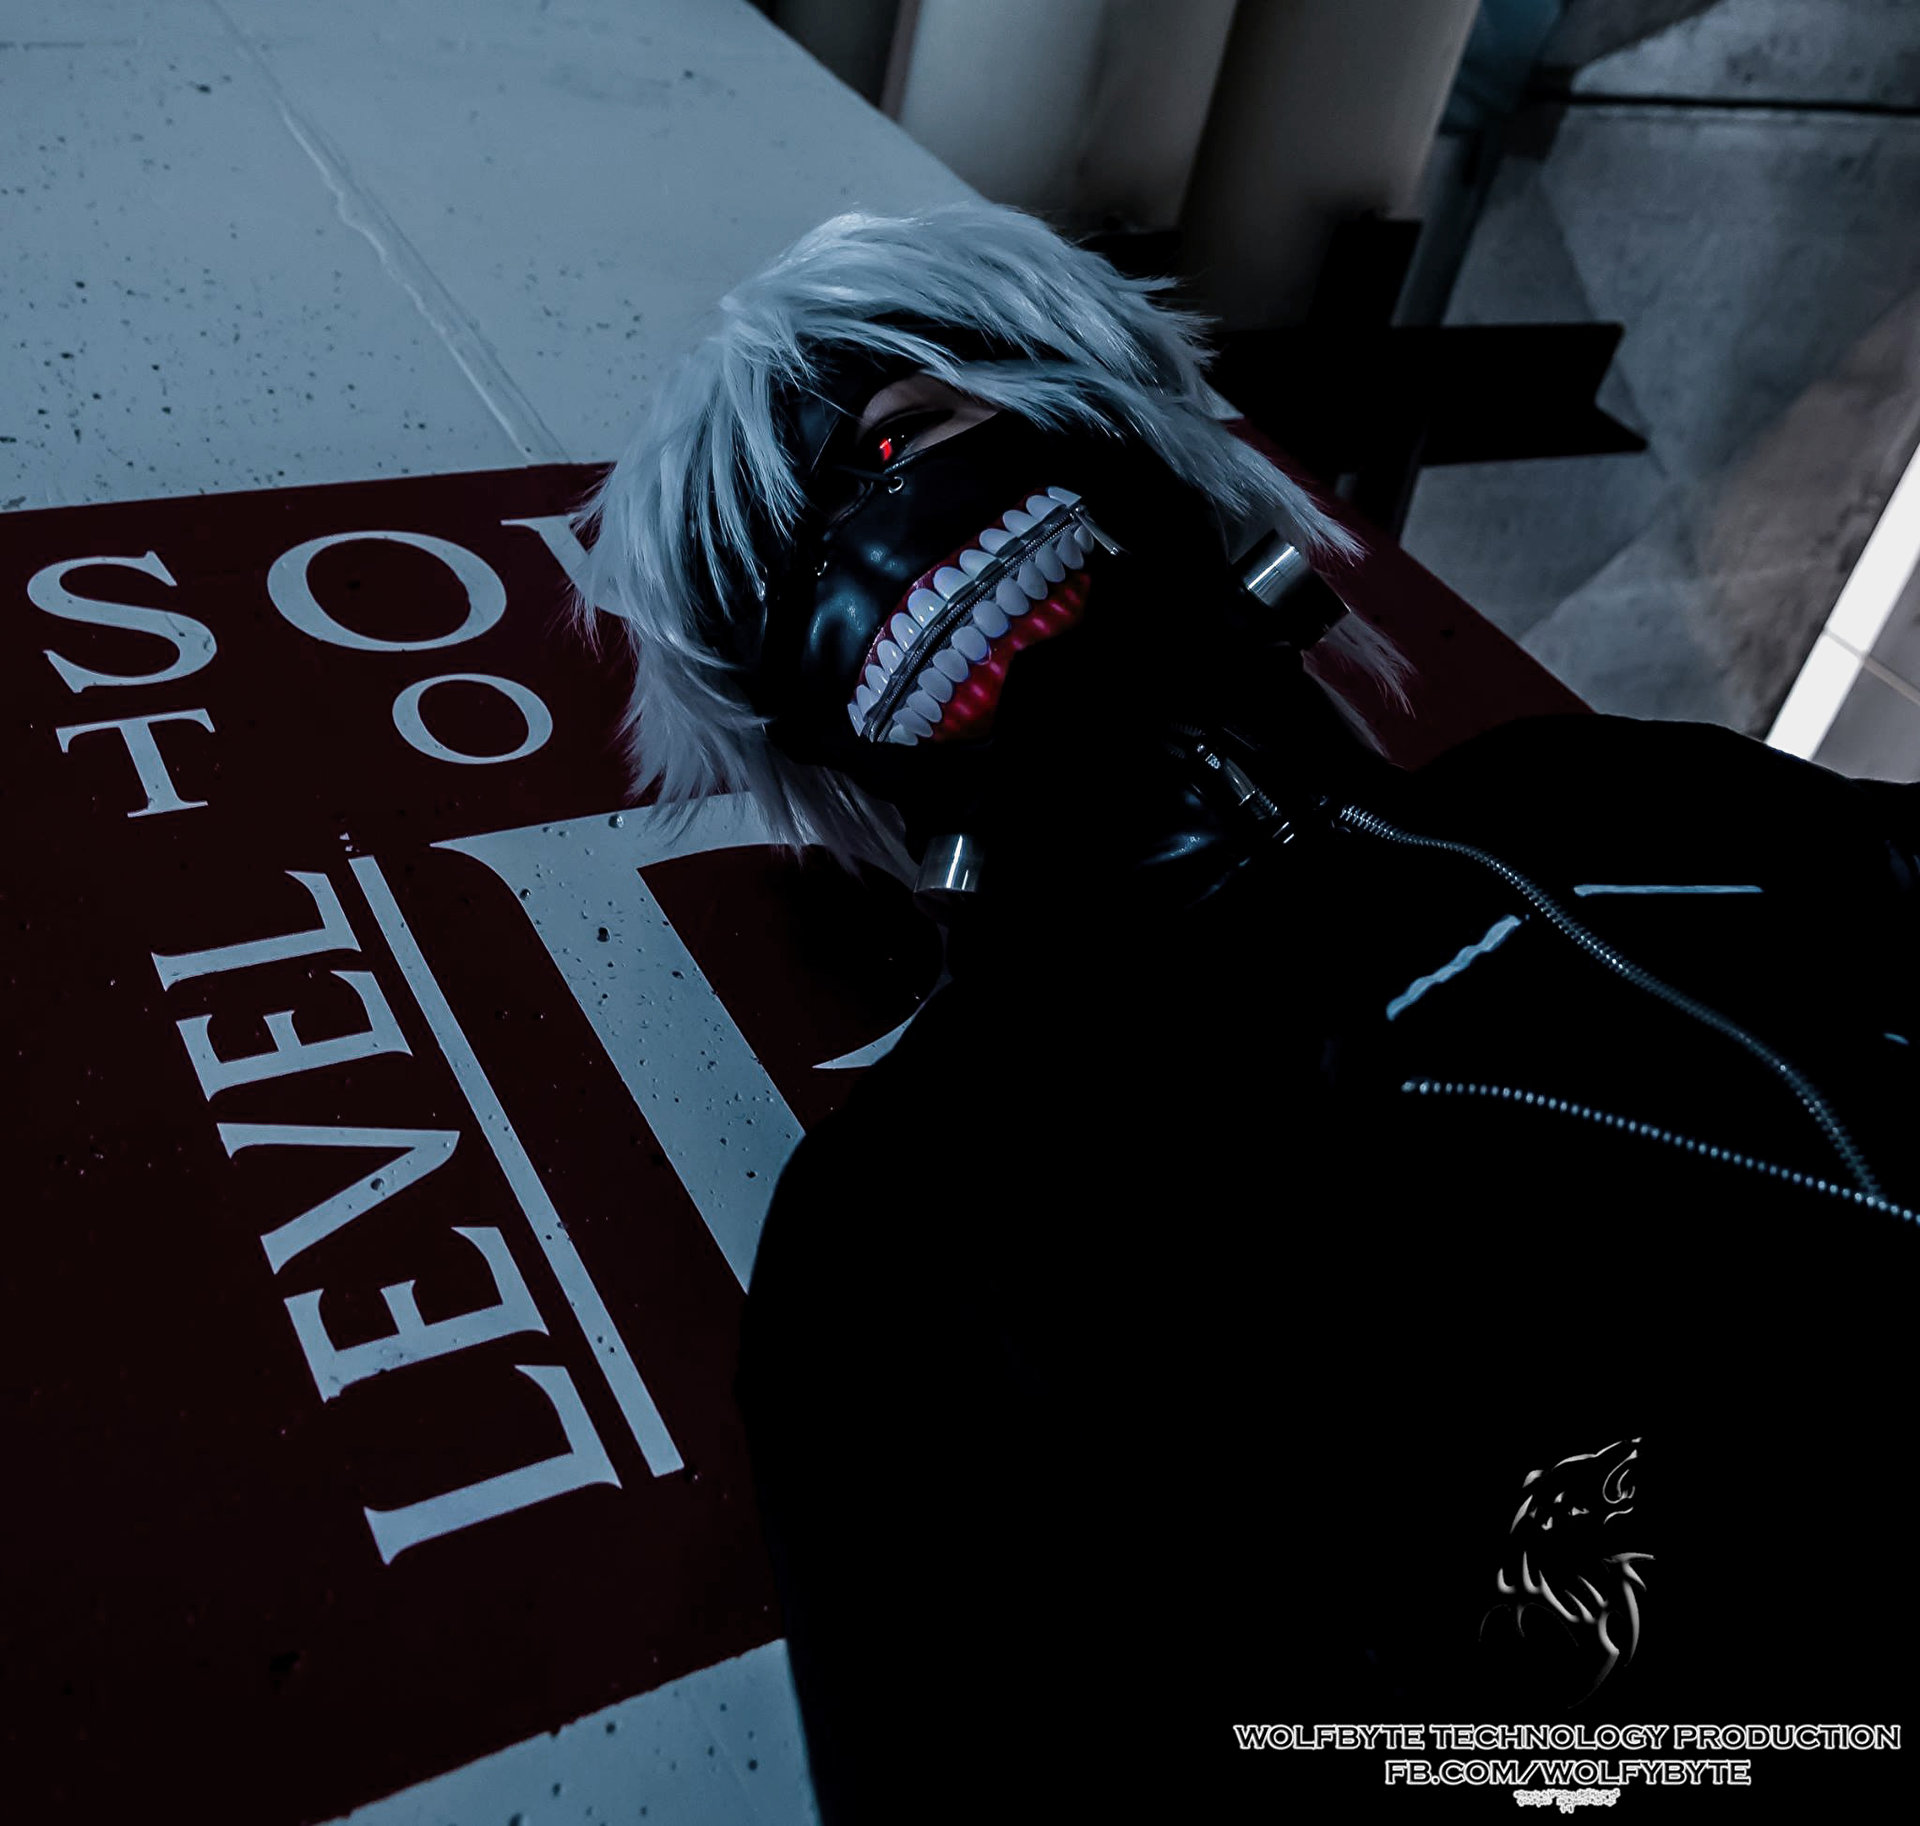 Cospix.net photo featuring Isho Cosplay